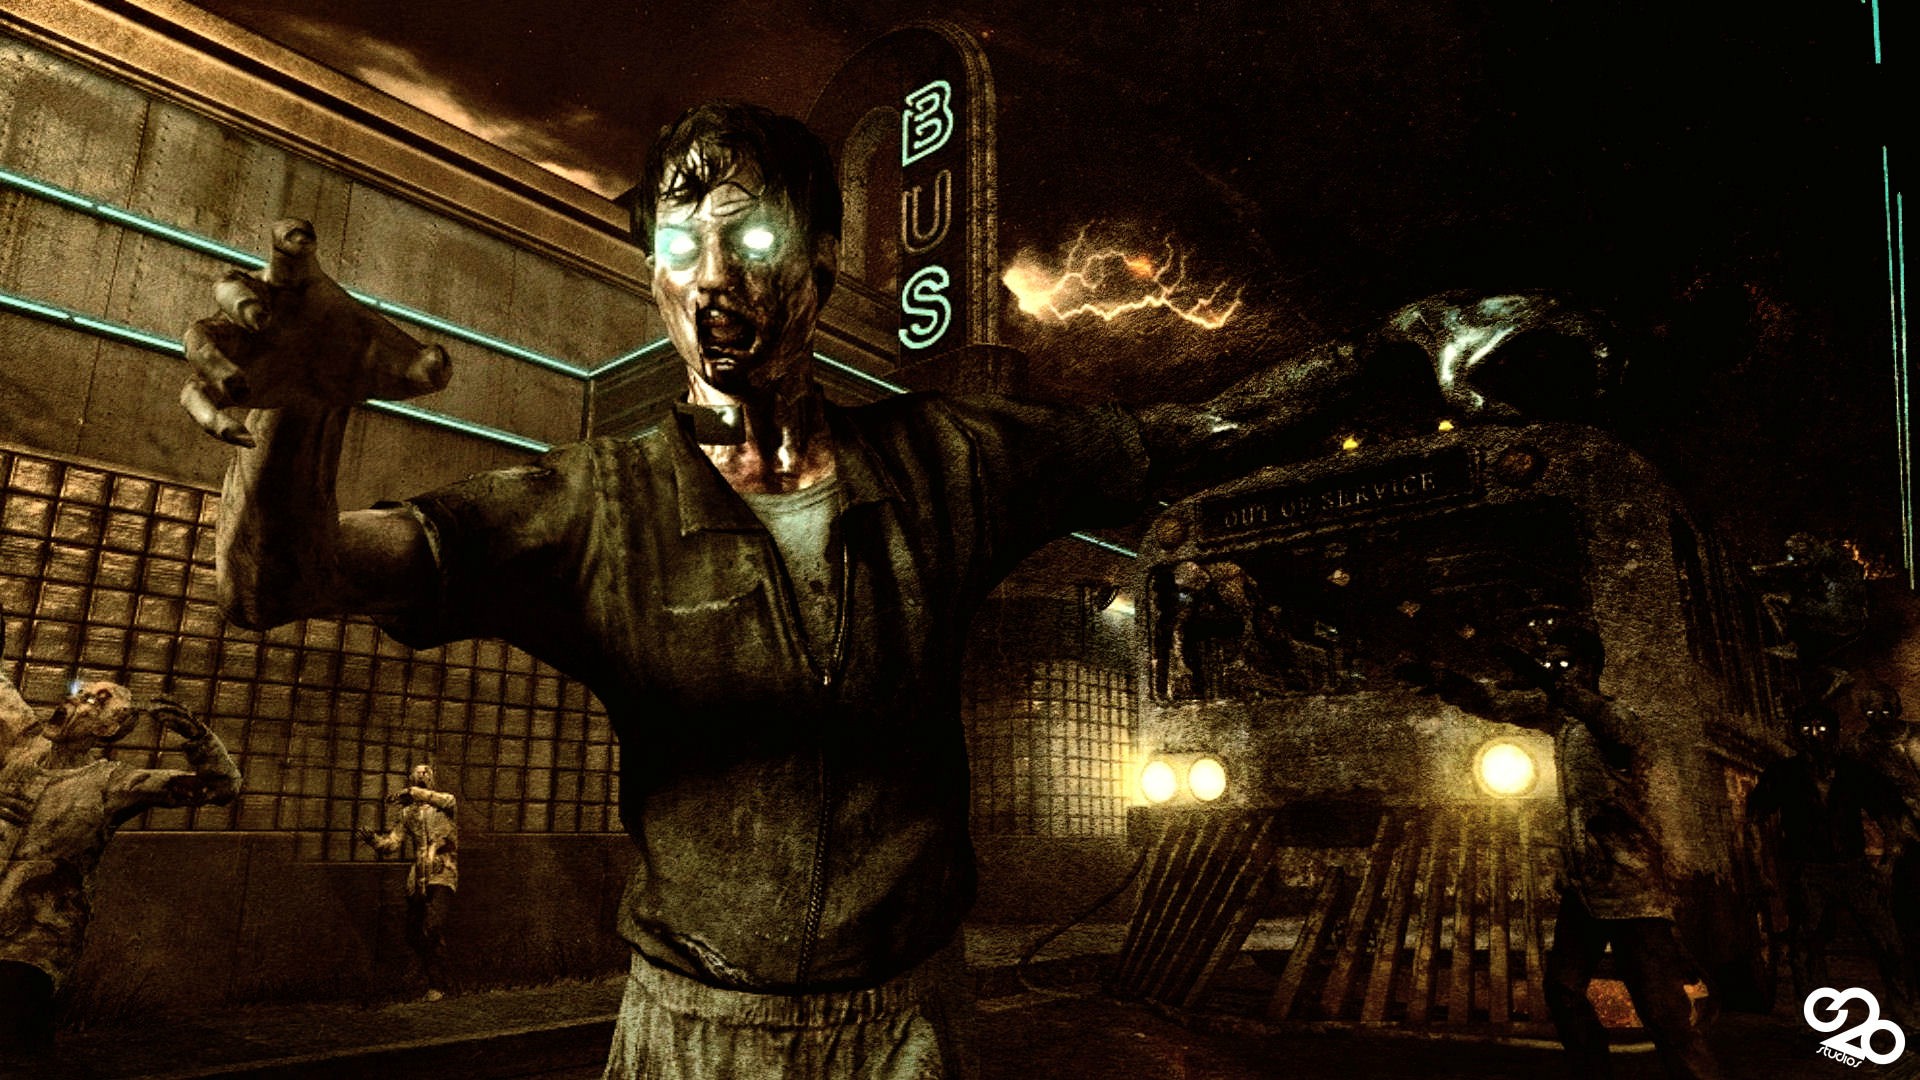 Free Download Ops Zombies Wallpaper 1920x1080call Of Duty